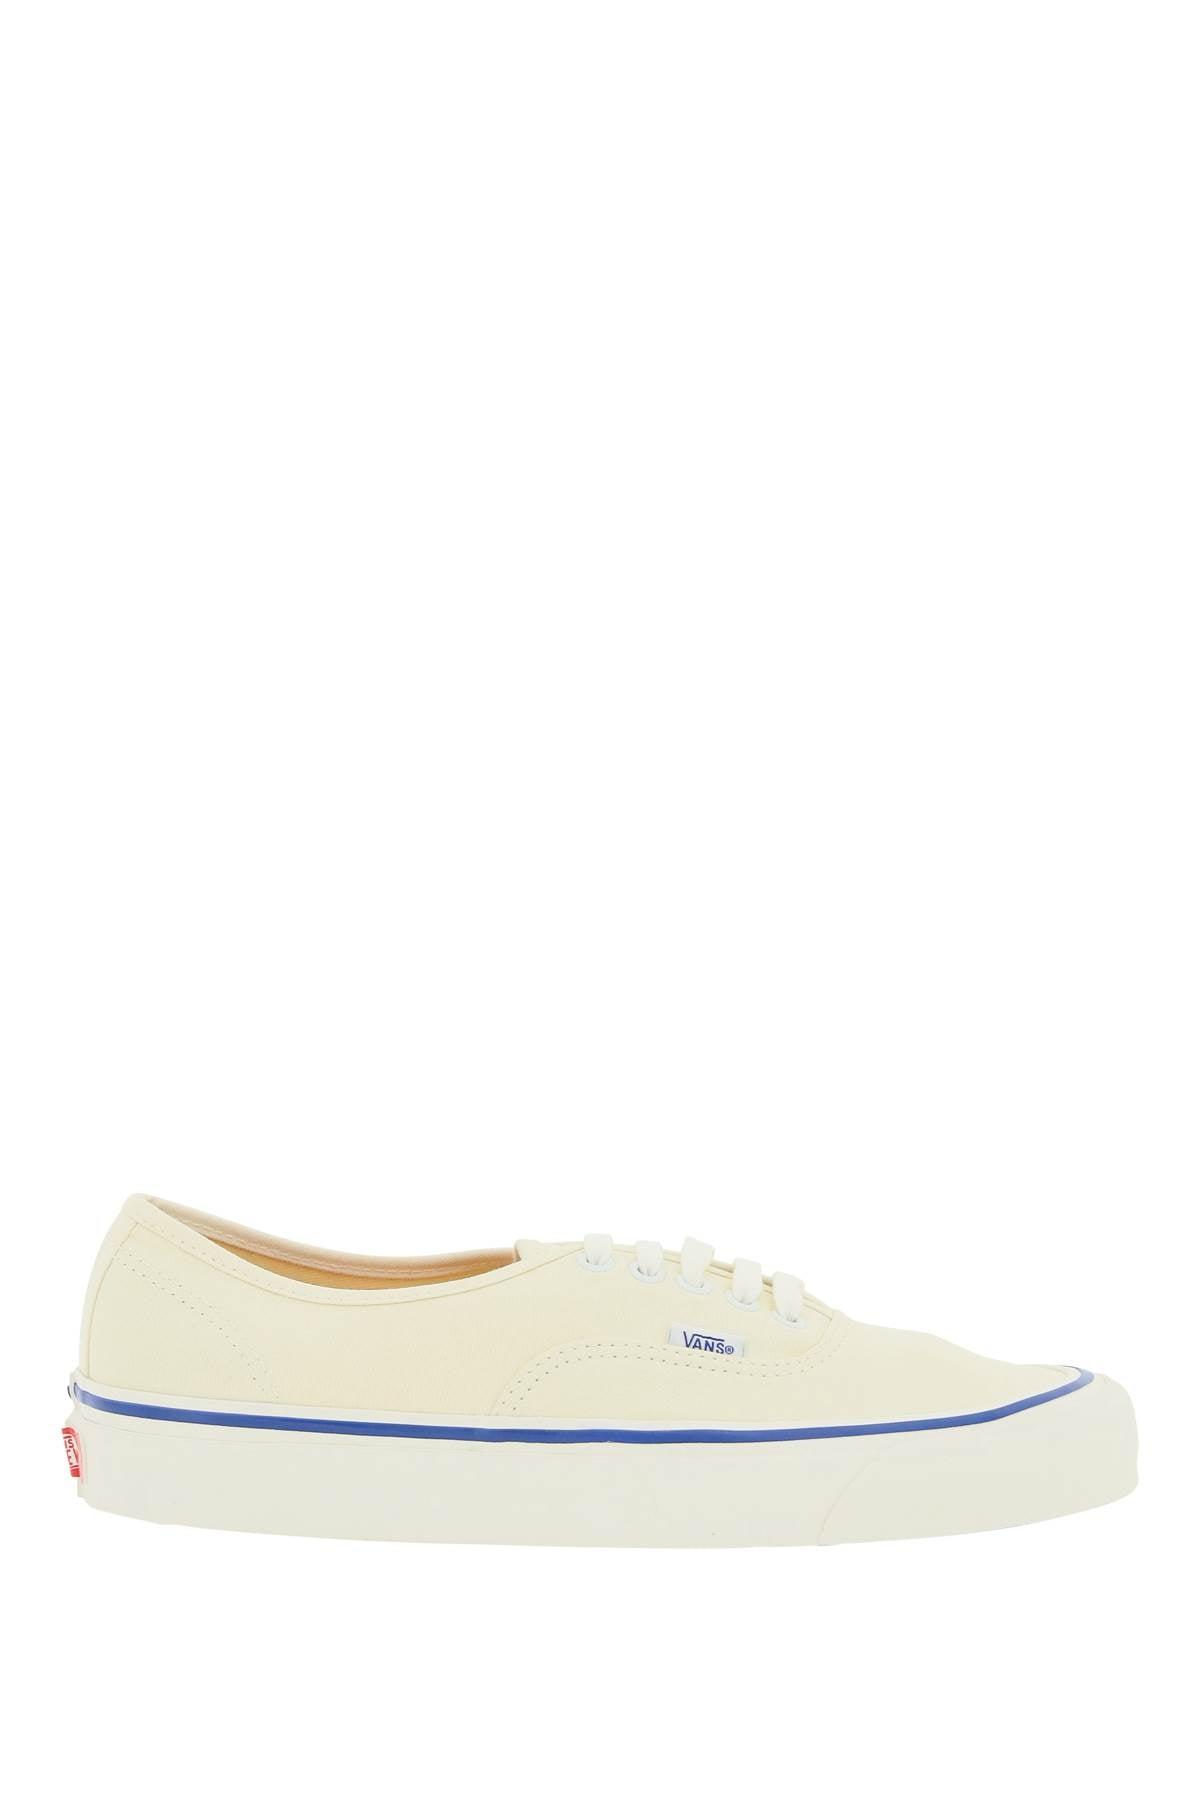 Vans Canvas Authentic 44 Deck Dx Sneakers in White for Men - Save 28% | Lyst